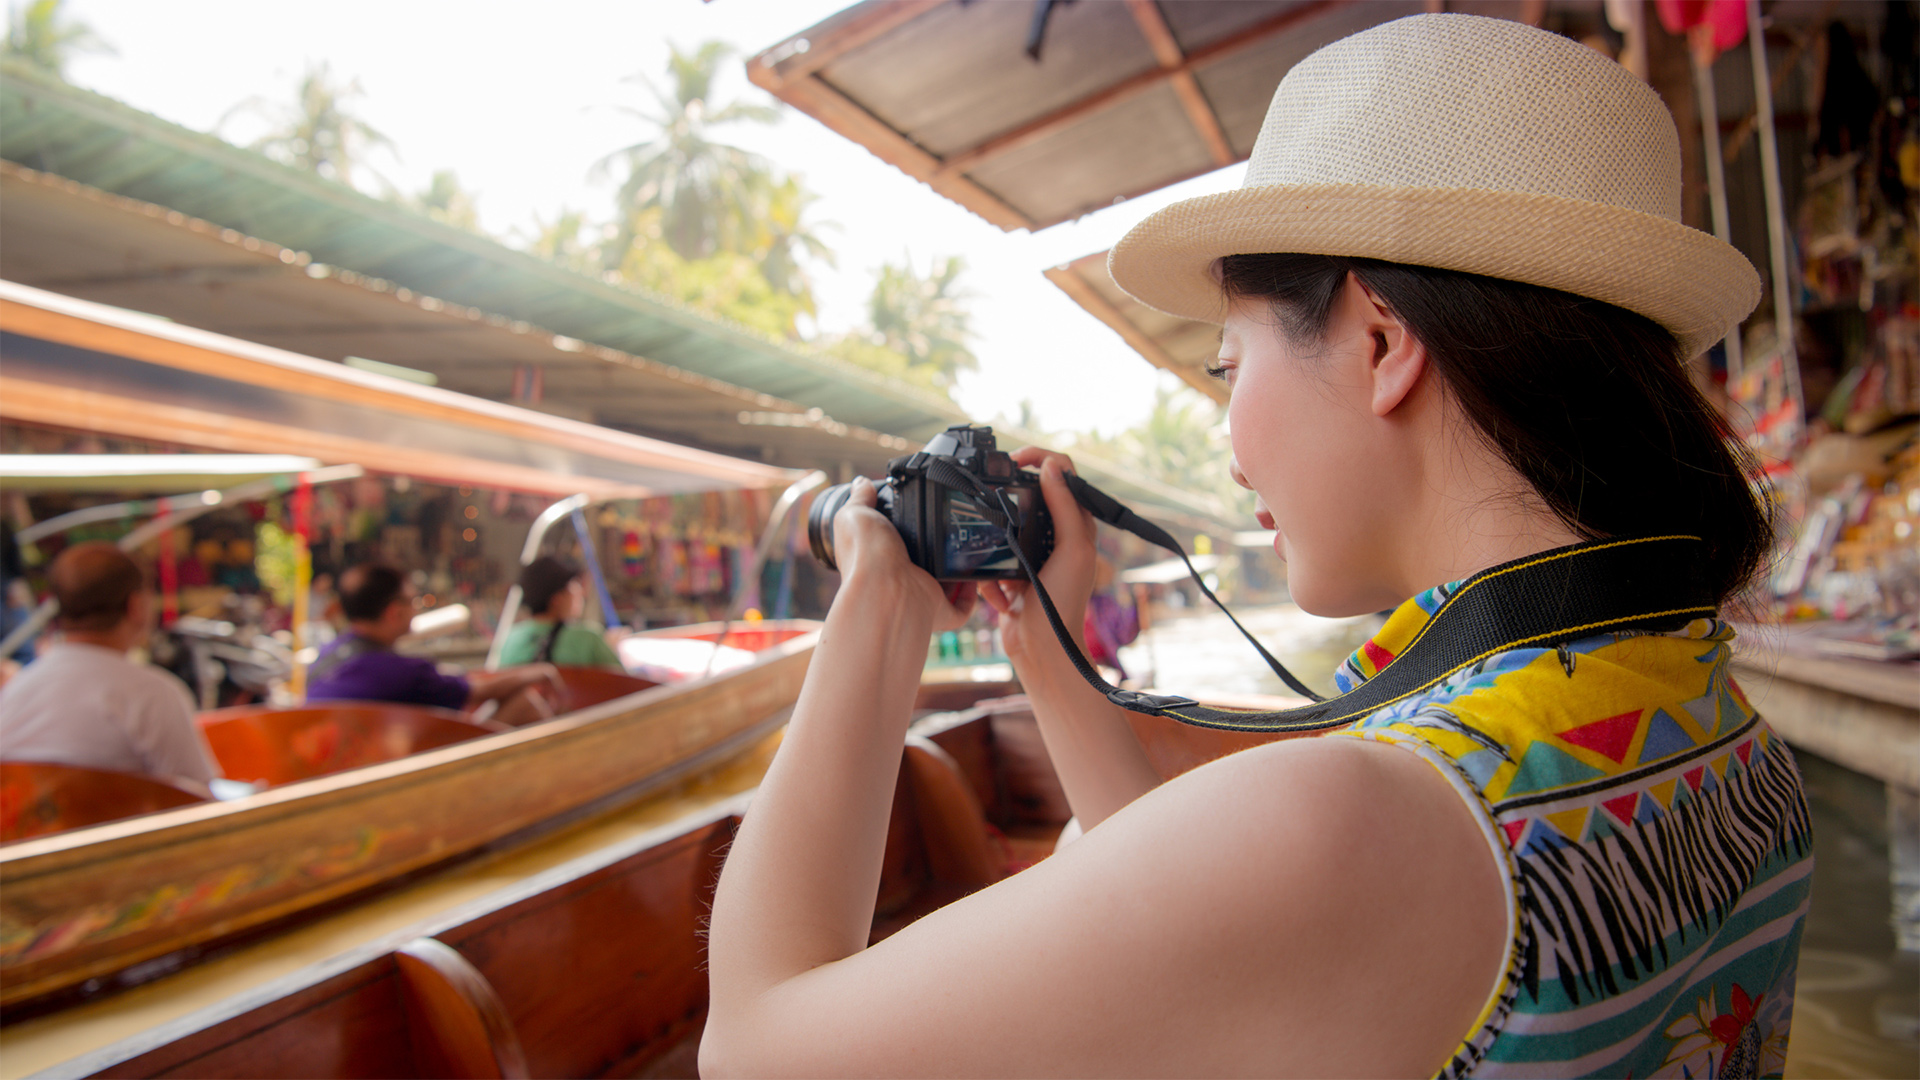 Make Your Vacation Video Projects A Fantastic Conversation Piece